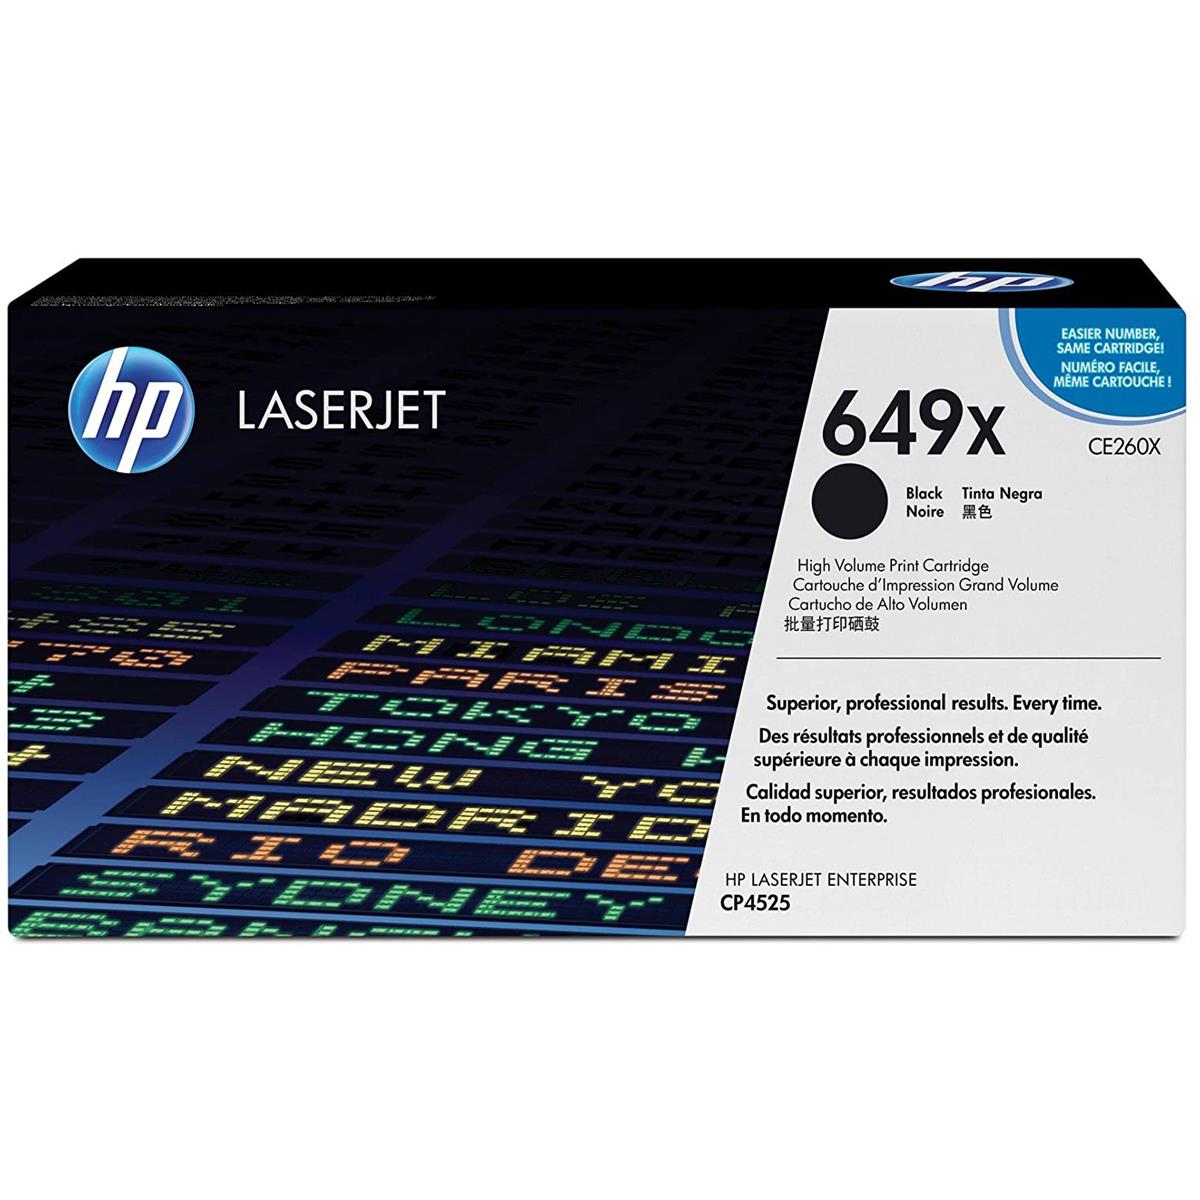 Image of HP CE260X Black Cartridge with Color-Sphere Toner